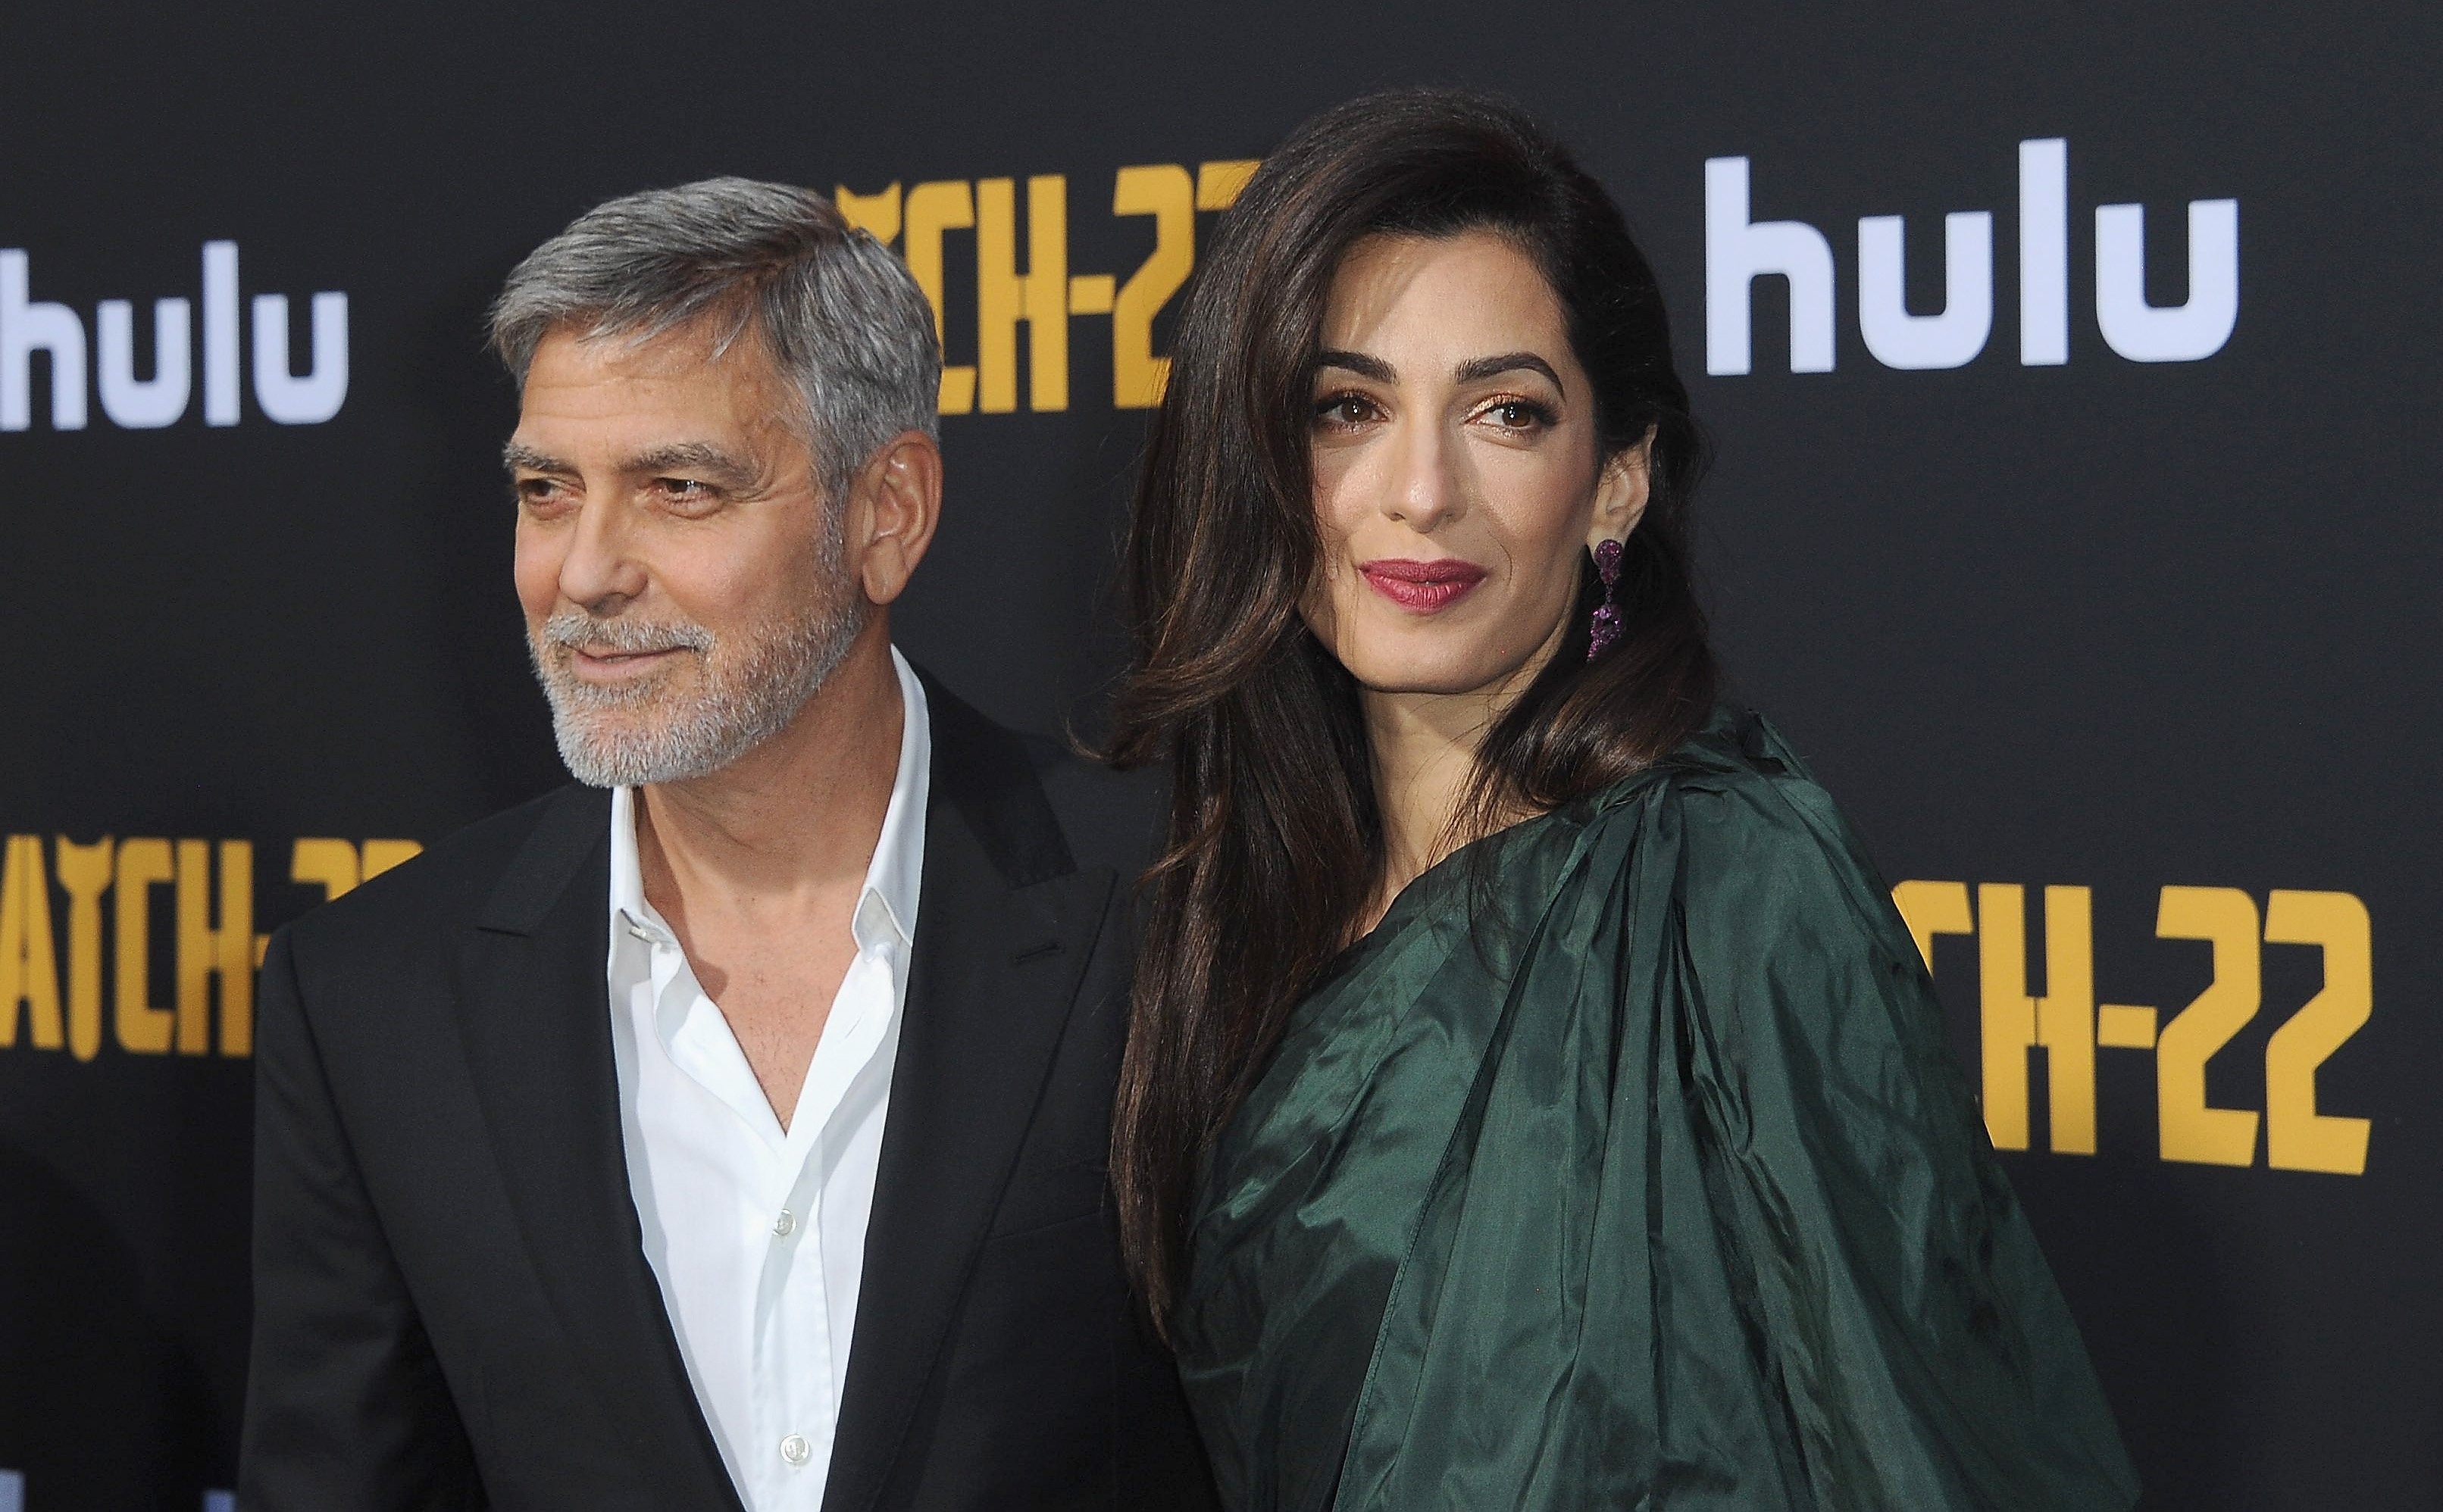 George Clooney and Amal Clooney arrive for the U.S. Premiere Of Hulu's "Catch-22" held at TCL Chinese Theatre on May 7, 2019, in Hollywood, California. Source: Getty Images.